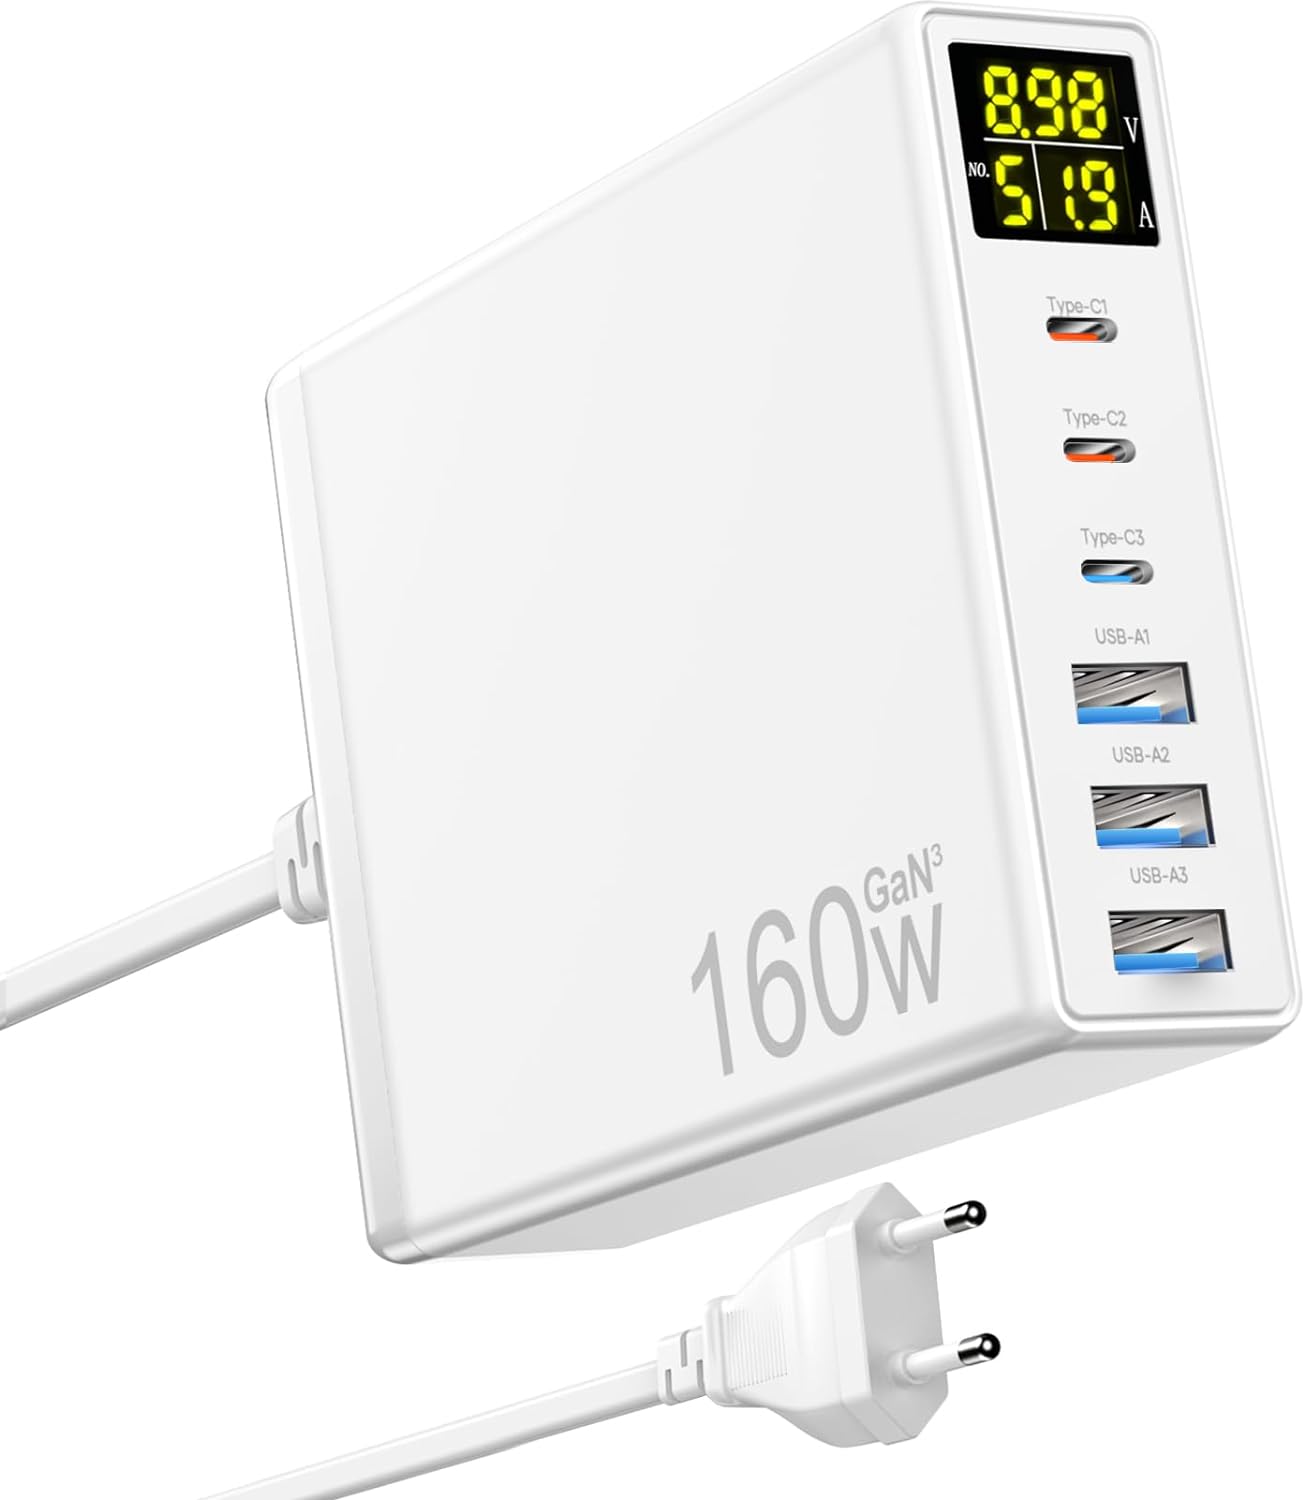 chargeur rapide 160W.jpg